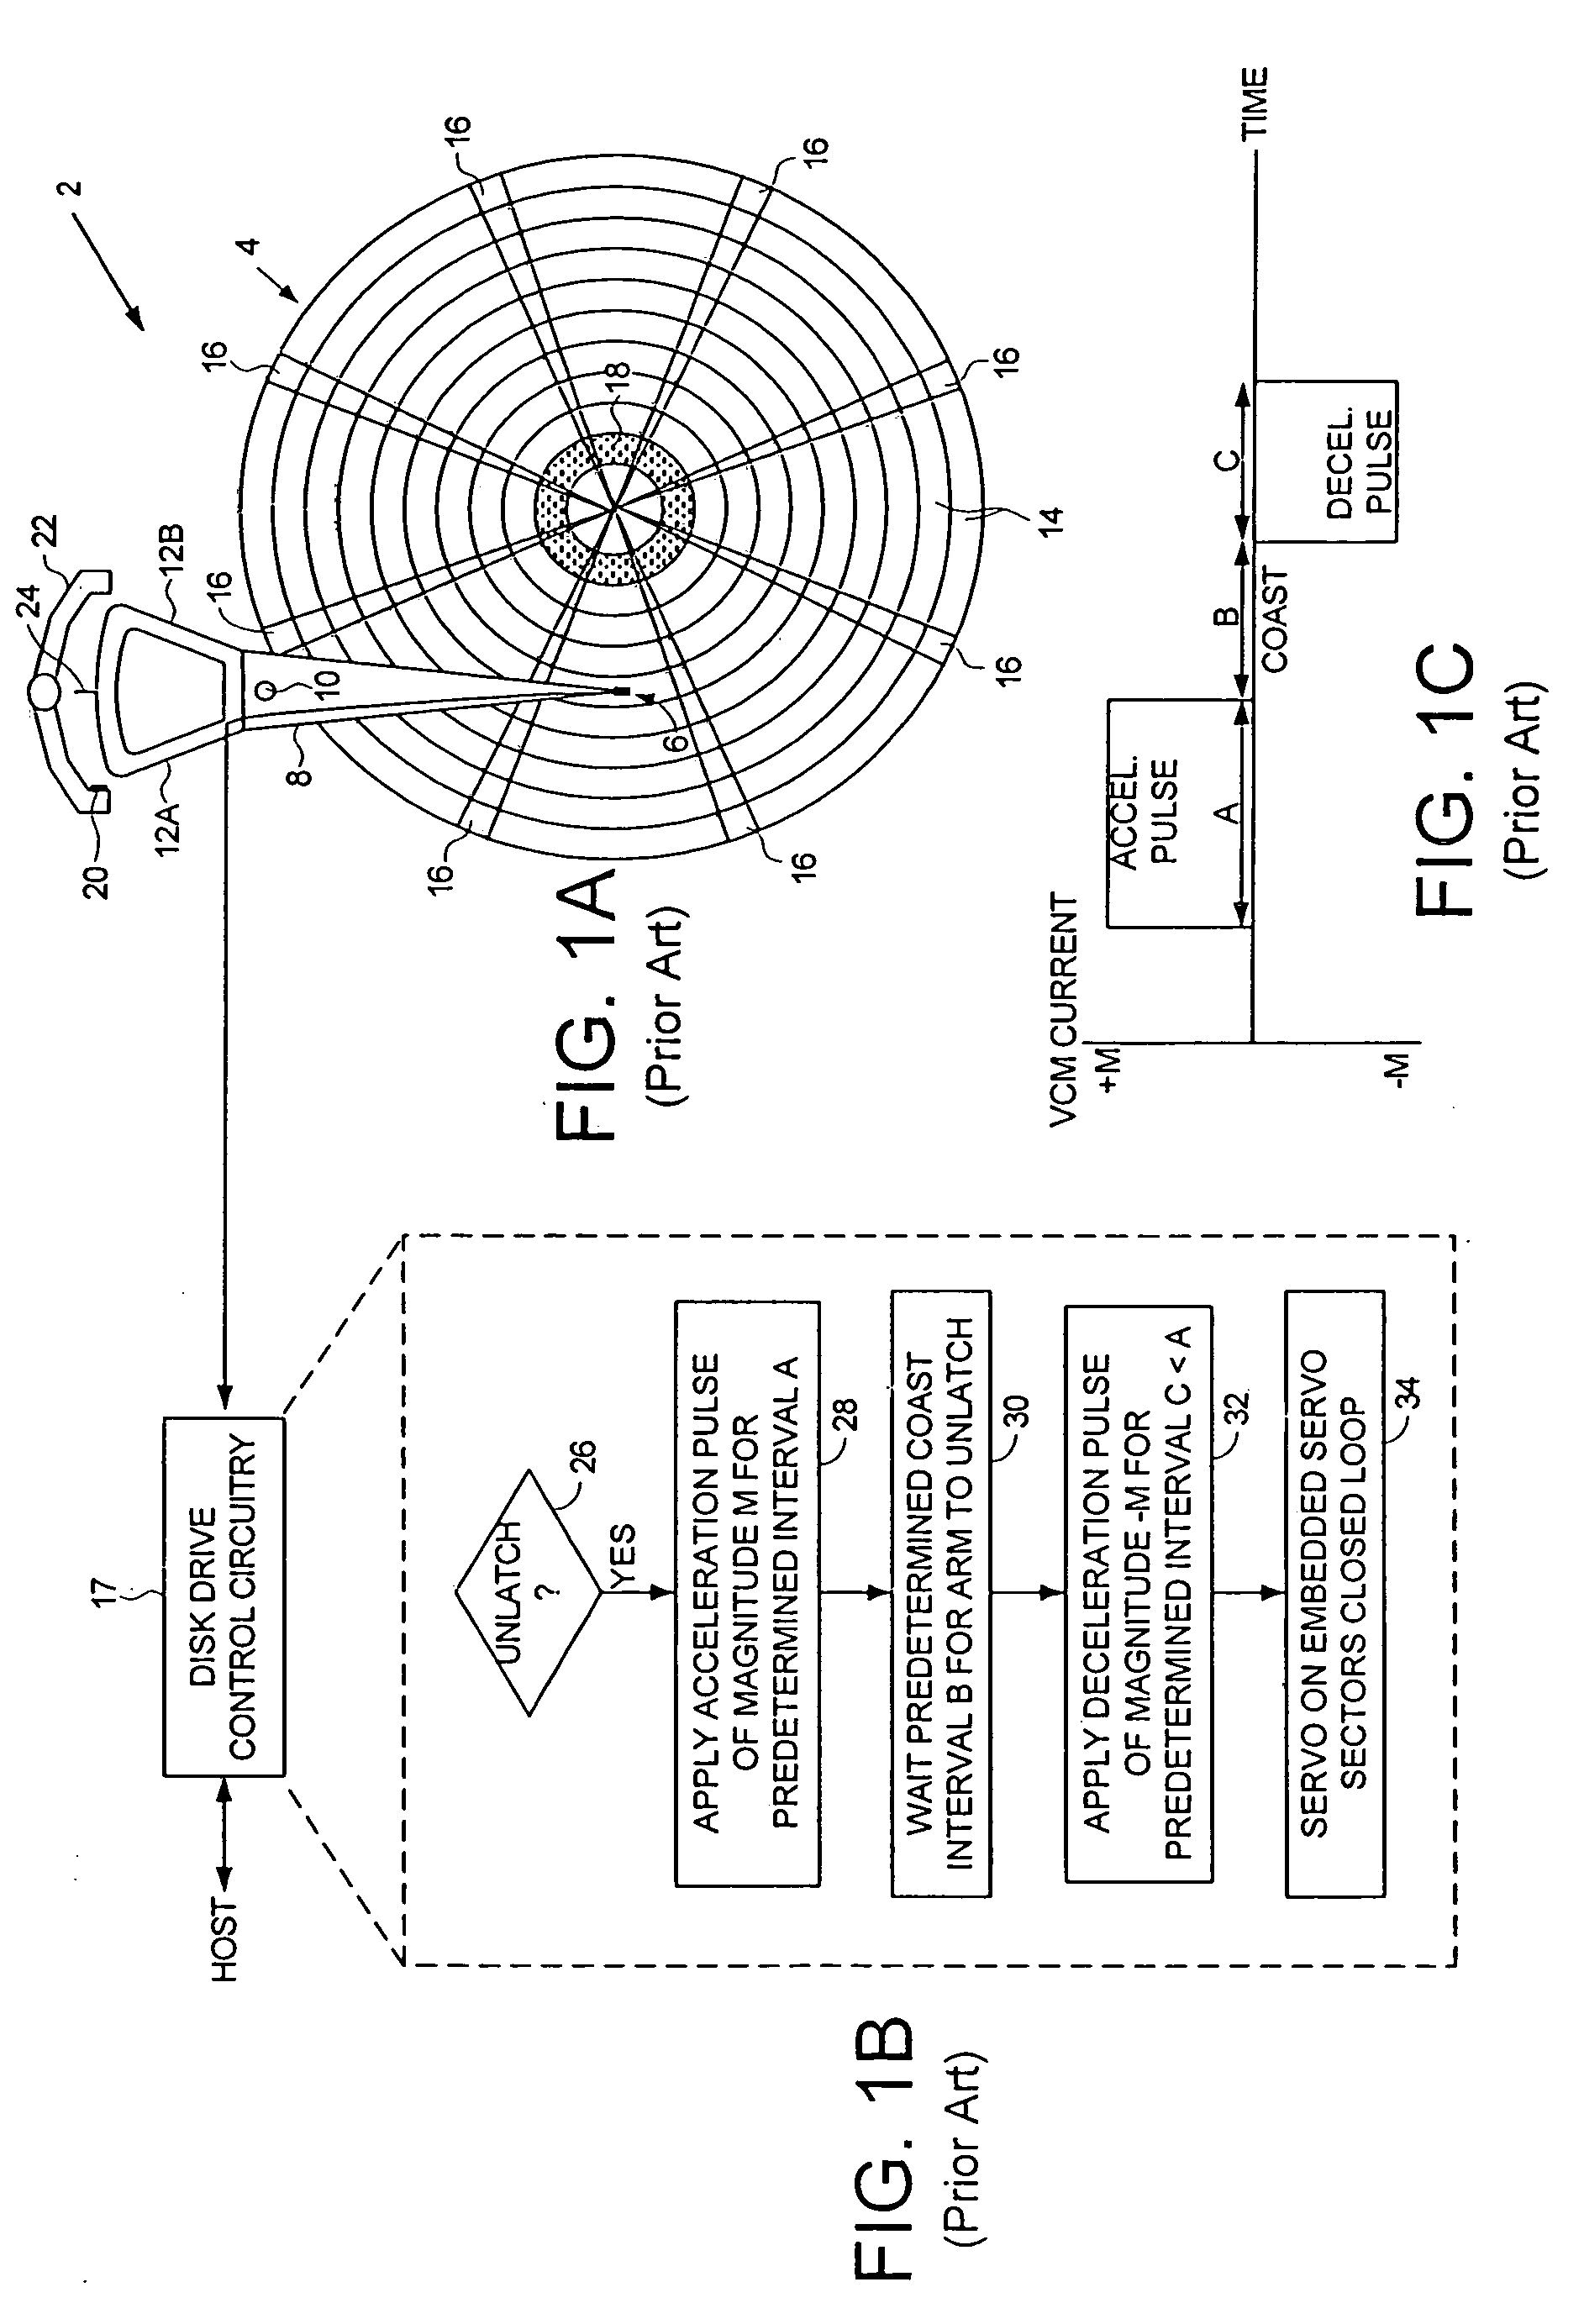 Disk drive employing a velocity profile and back EMF feedback to control a voice coil motor